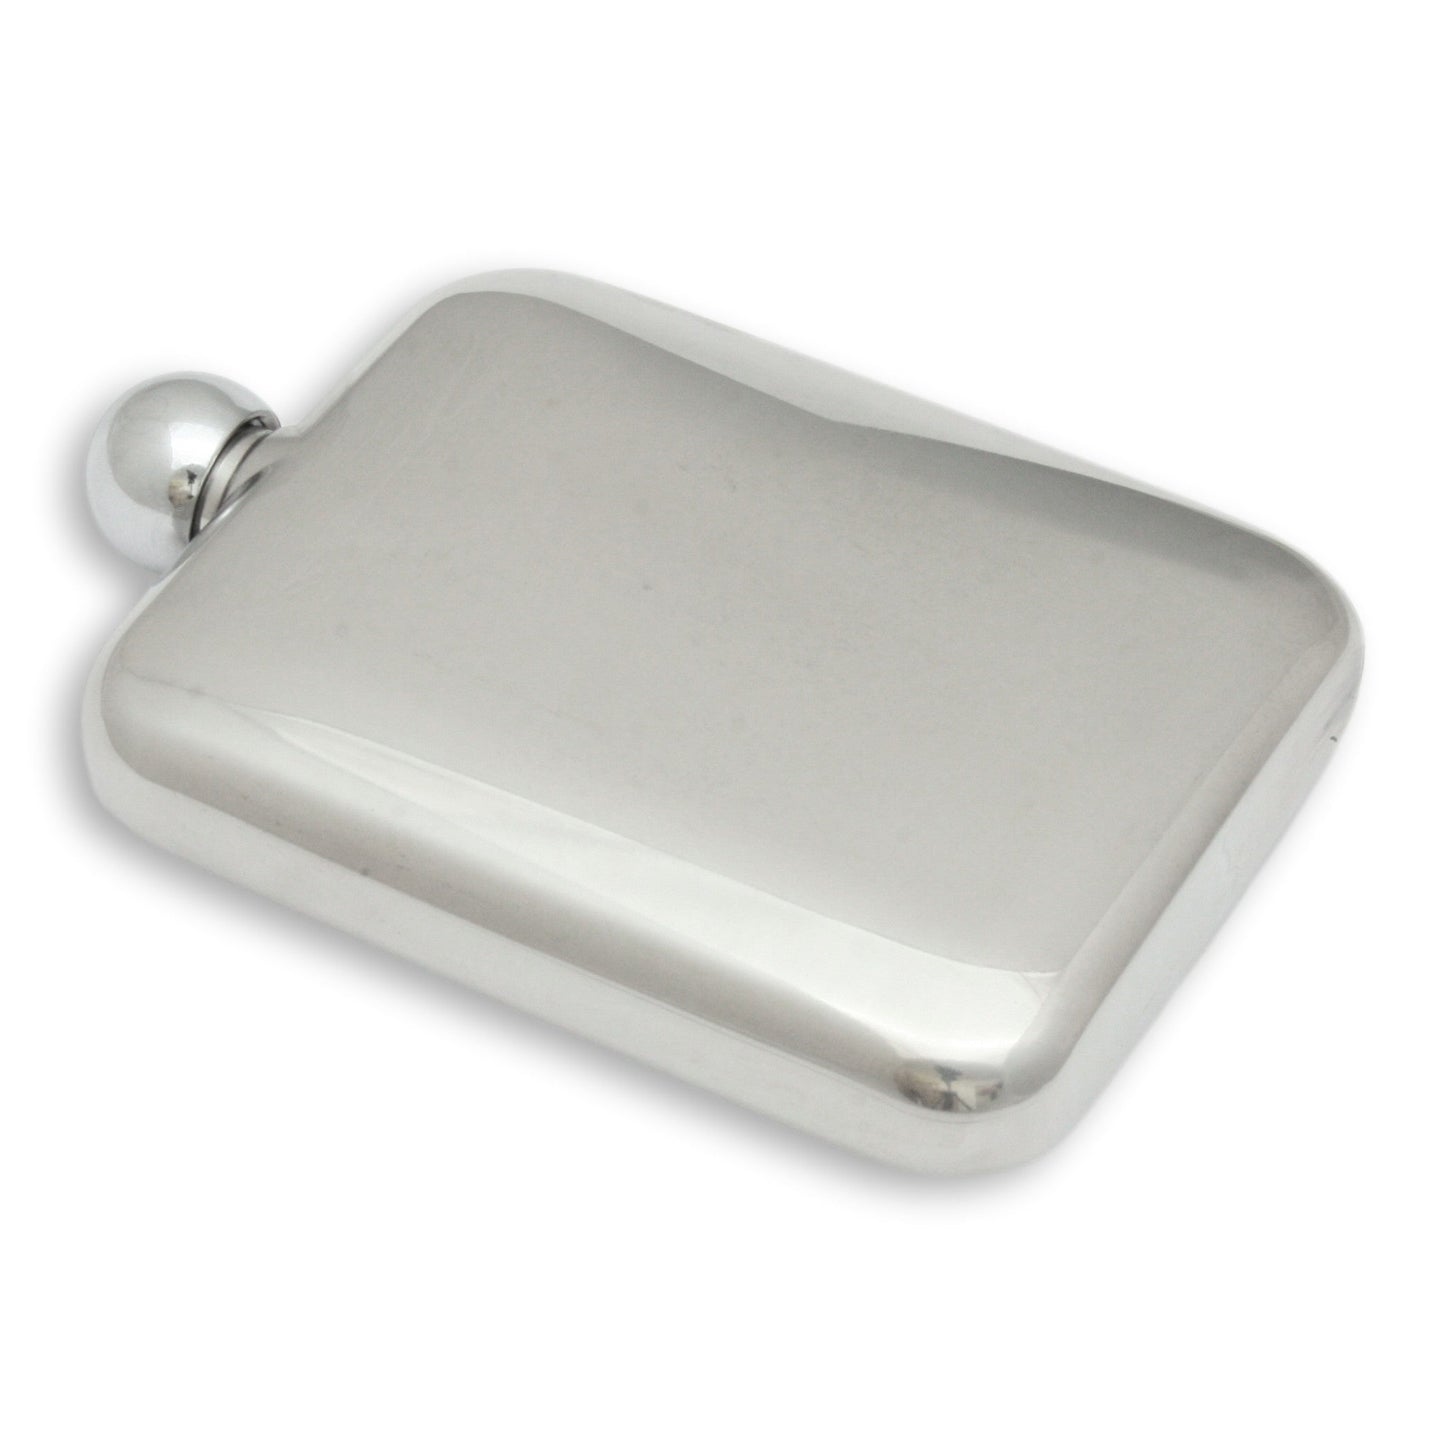 Full Leather Case Hip Flask Stainless STeel